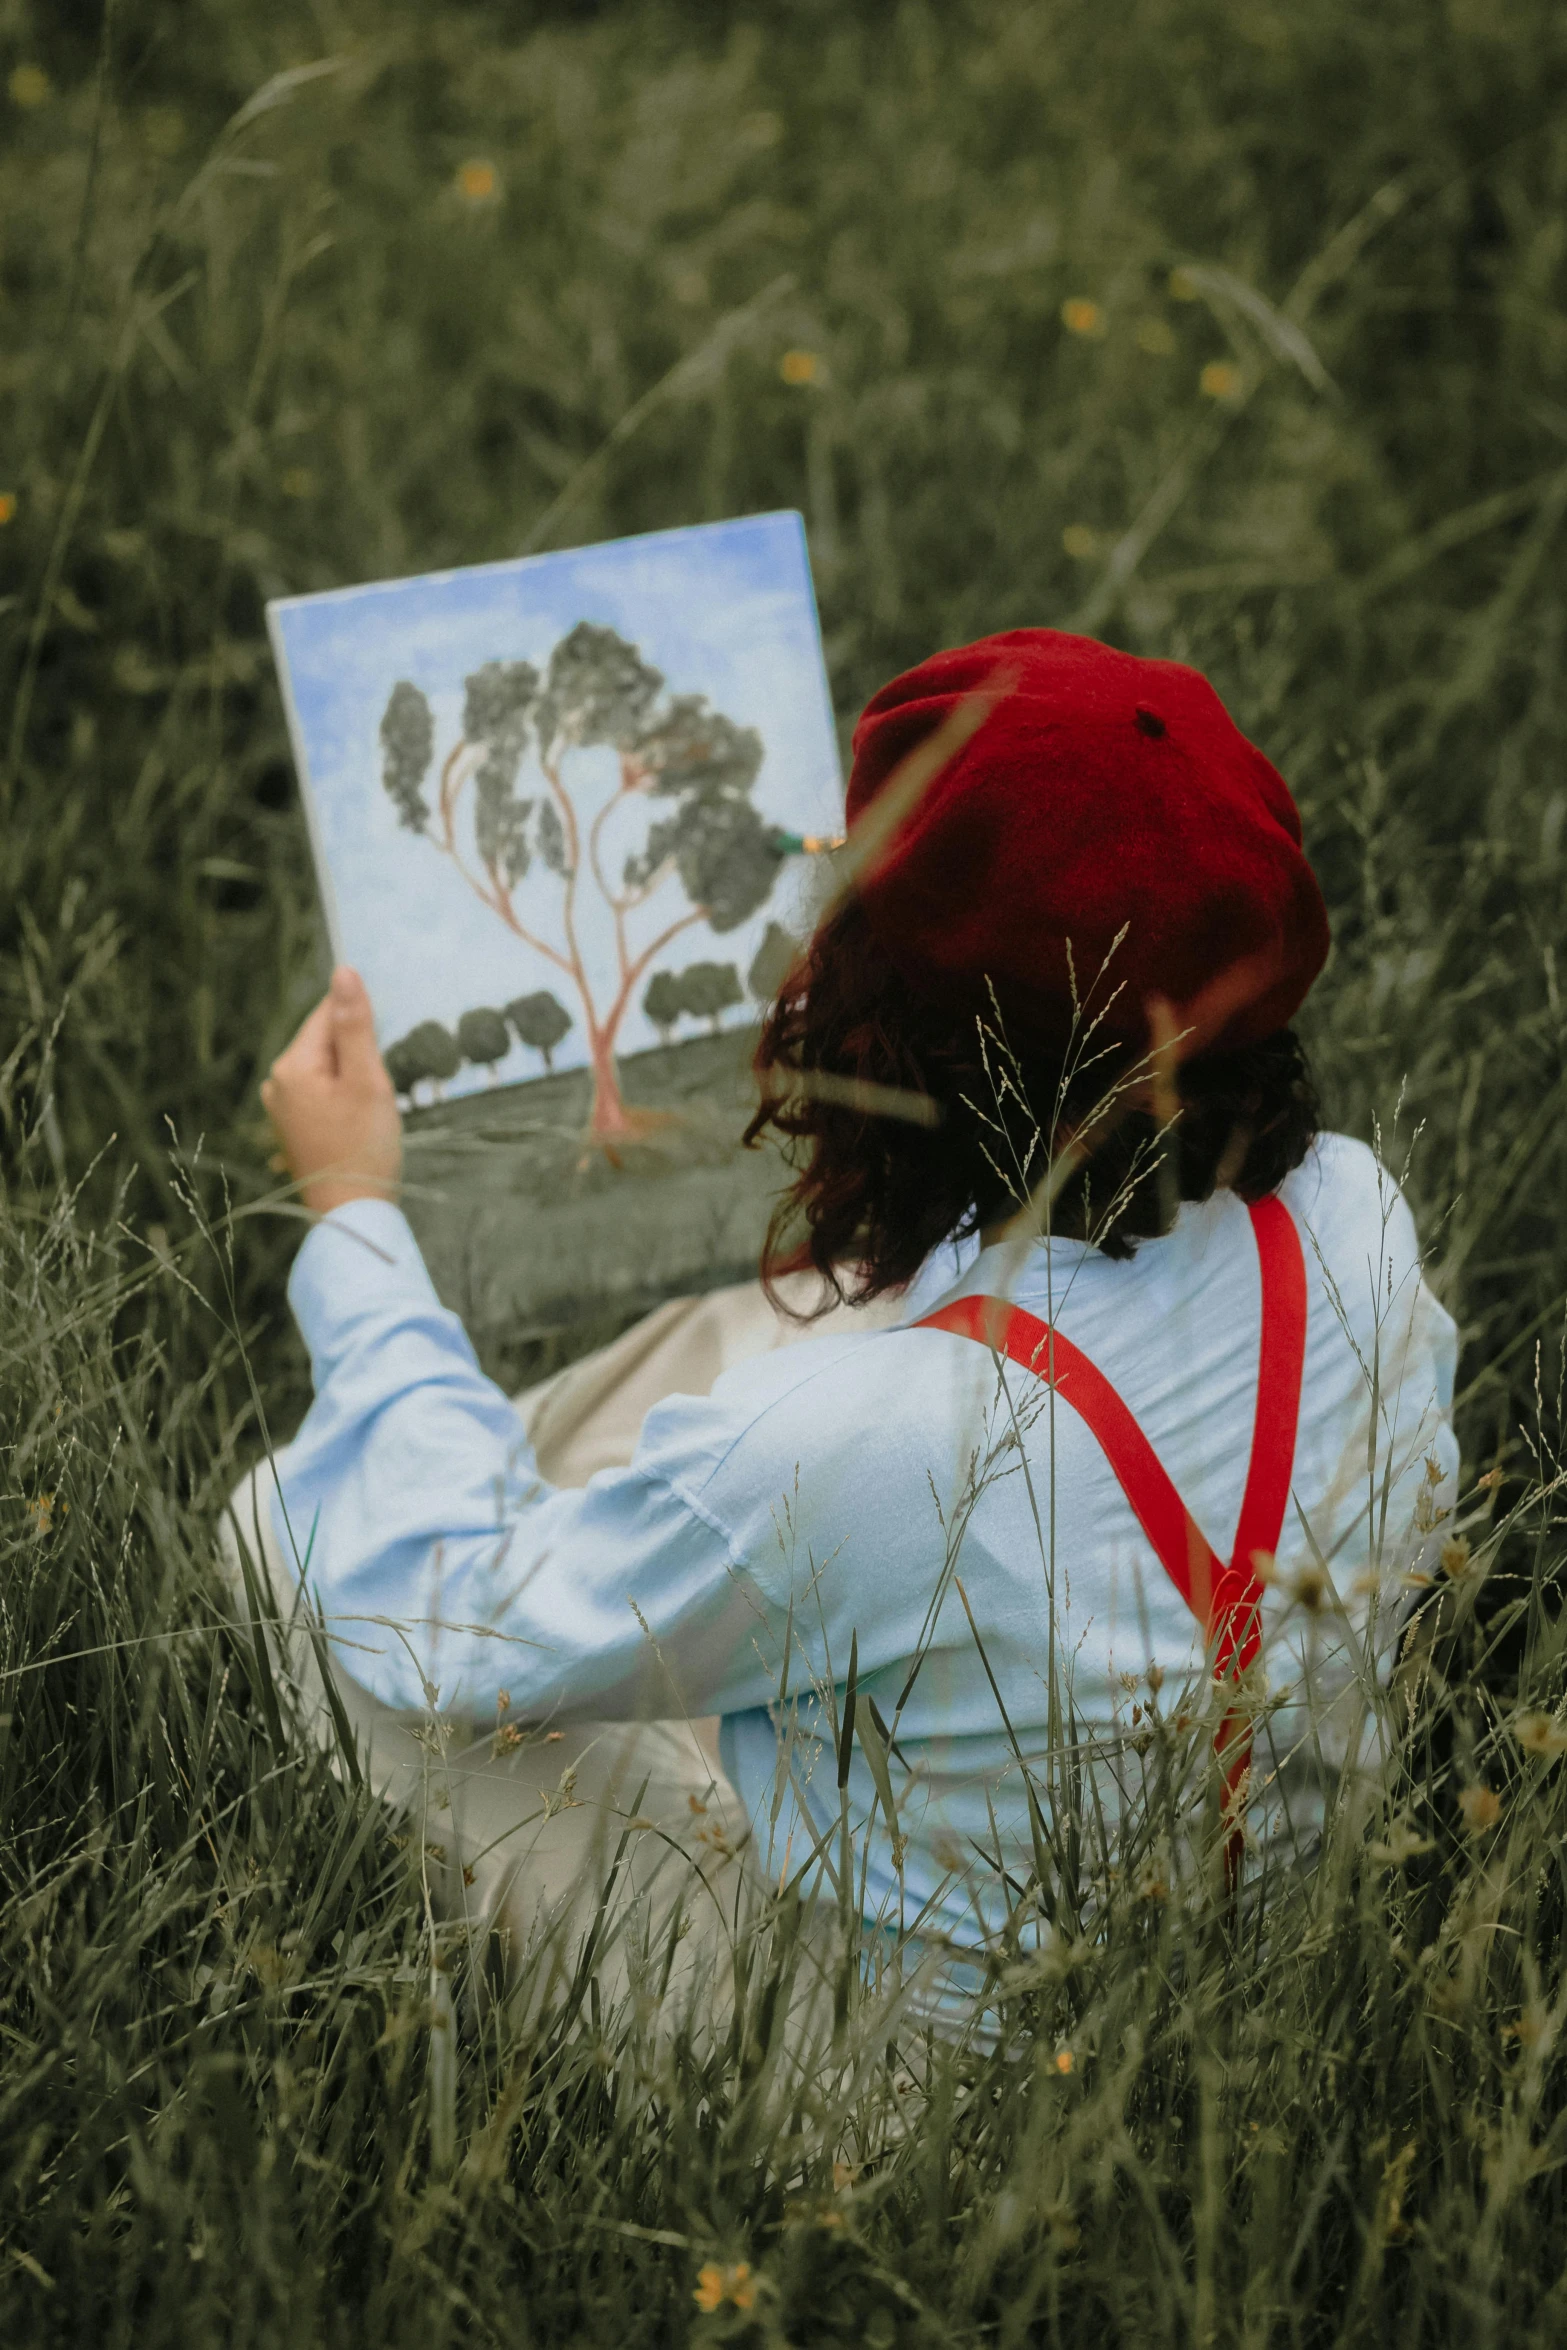 a person is sitting in the grass holding a painting